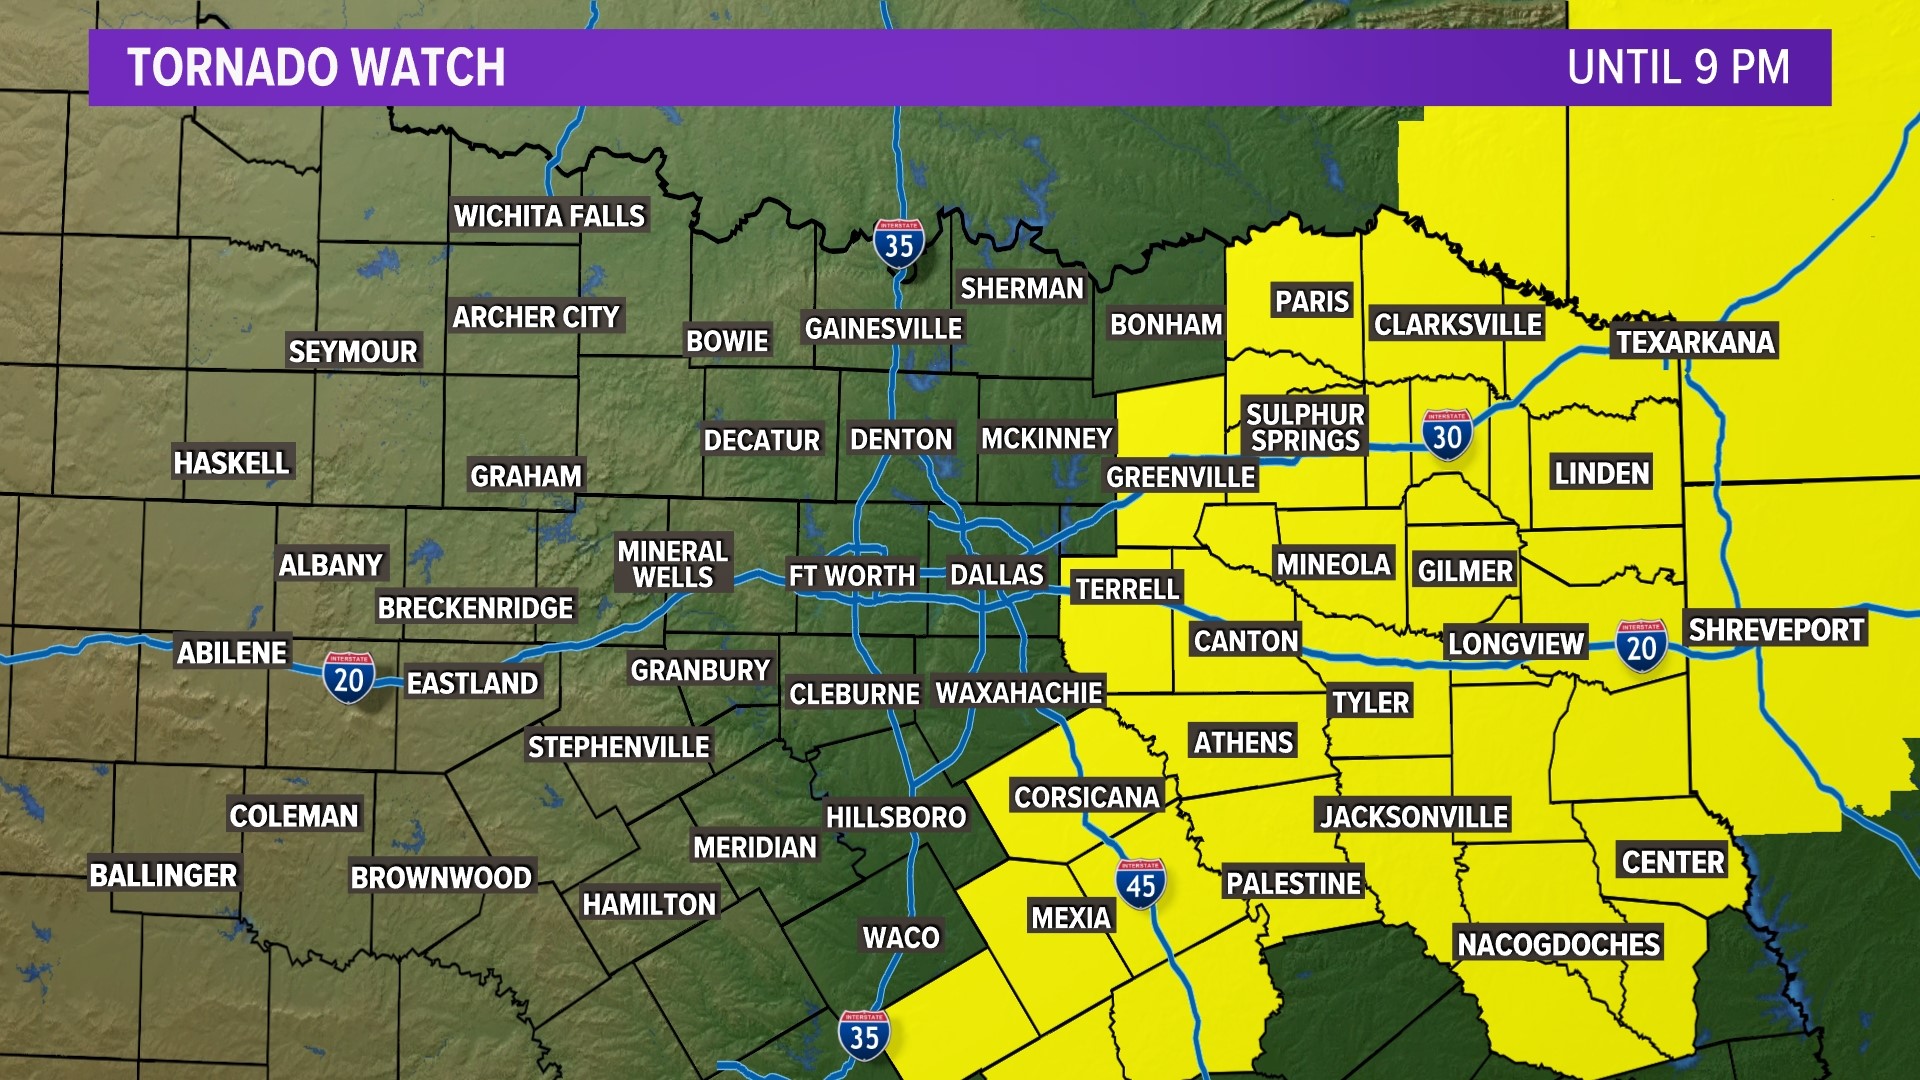 A Tornado Watch has been issued for parts of North Texas. Here is the latest radar look.